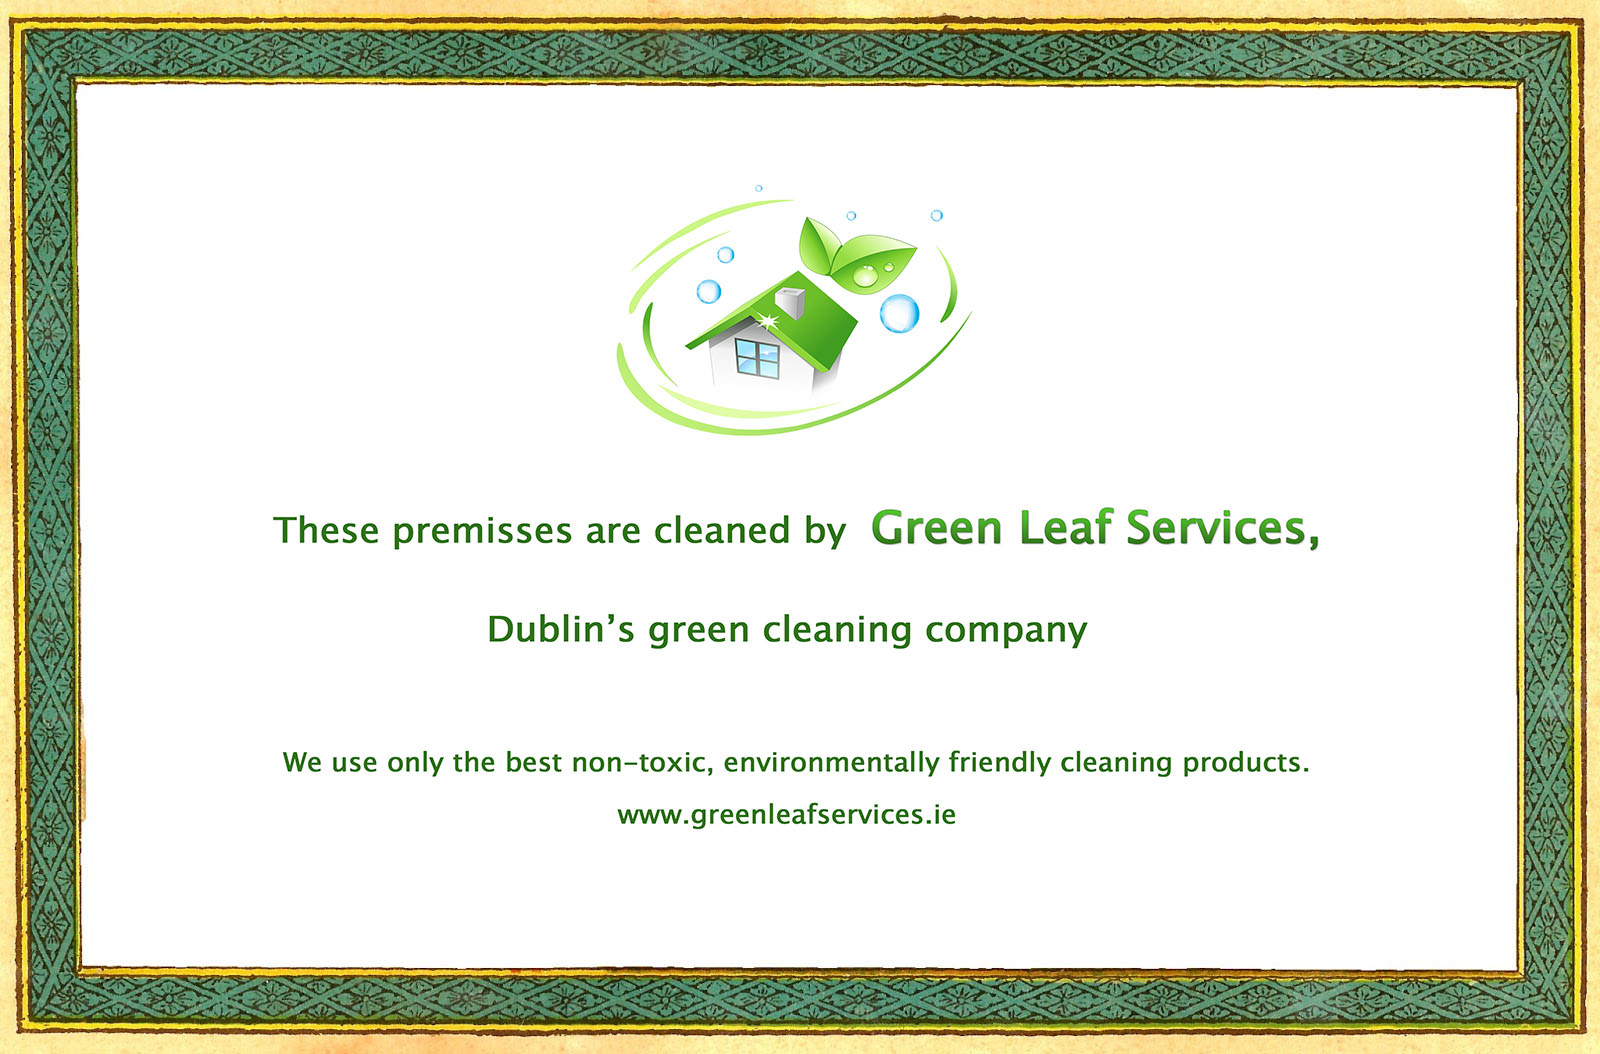 Cleaned by Green Leaf Services, Dublin